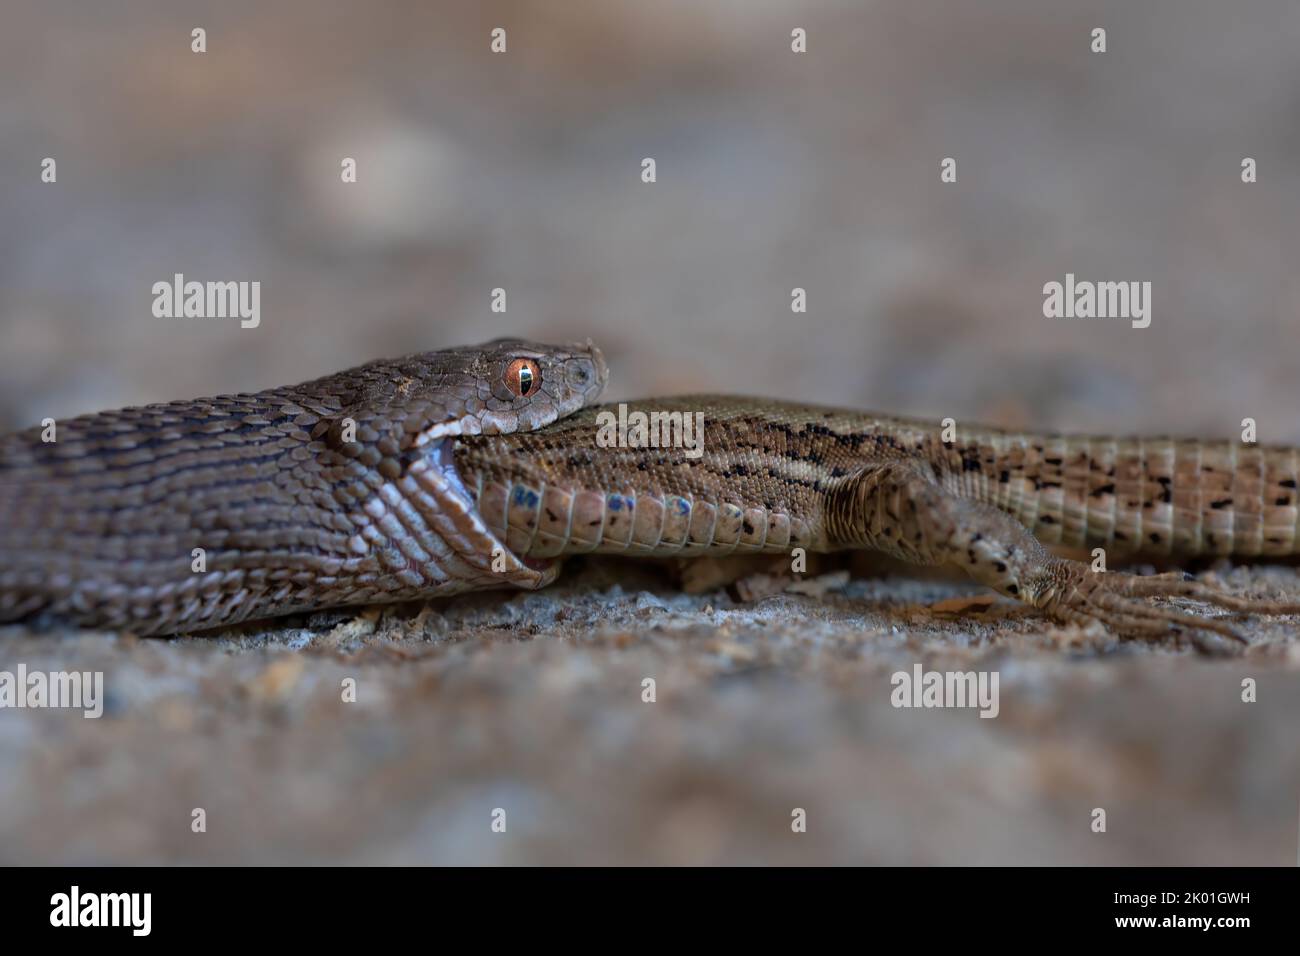 close-up of seoane's viper eating a lizard. living nature. extraordinary scene. copy space. amazing capture Stock Photo